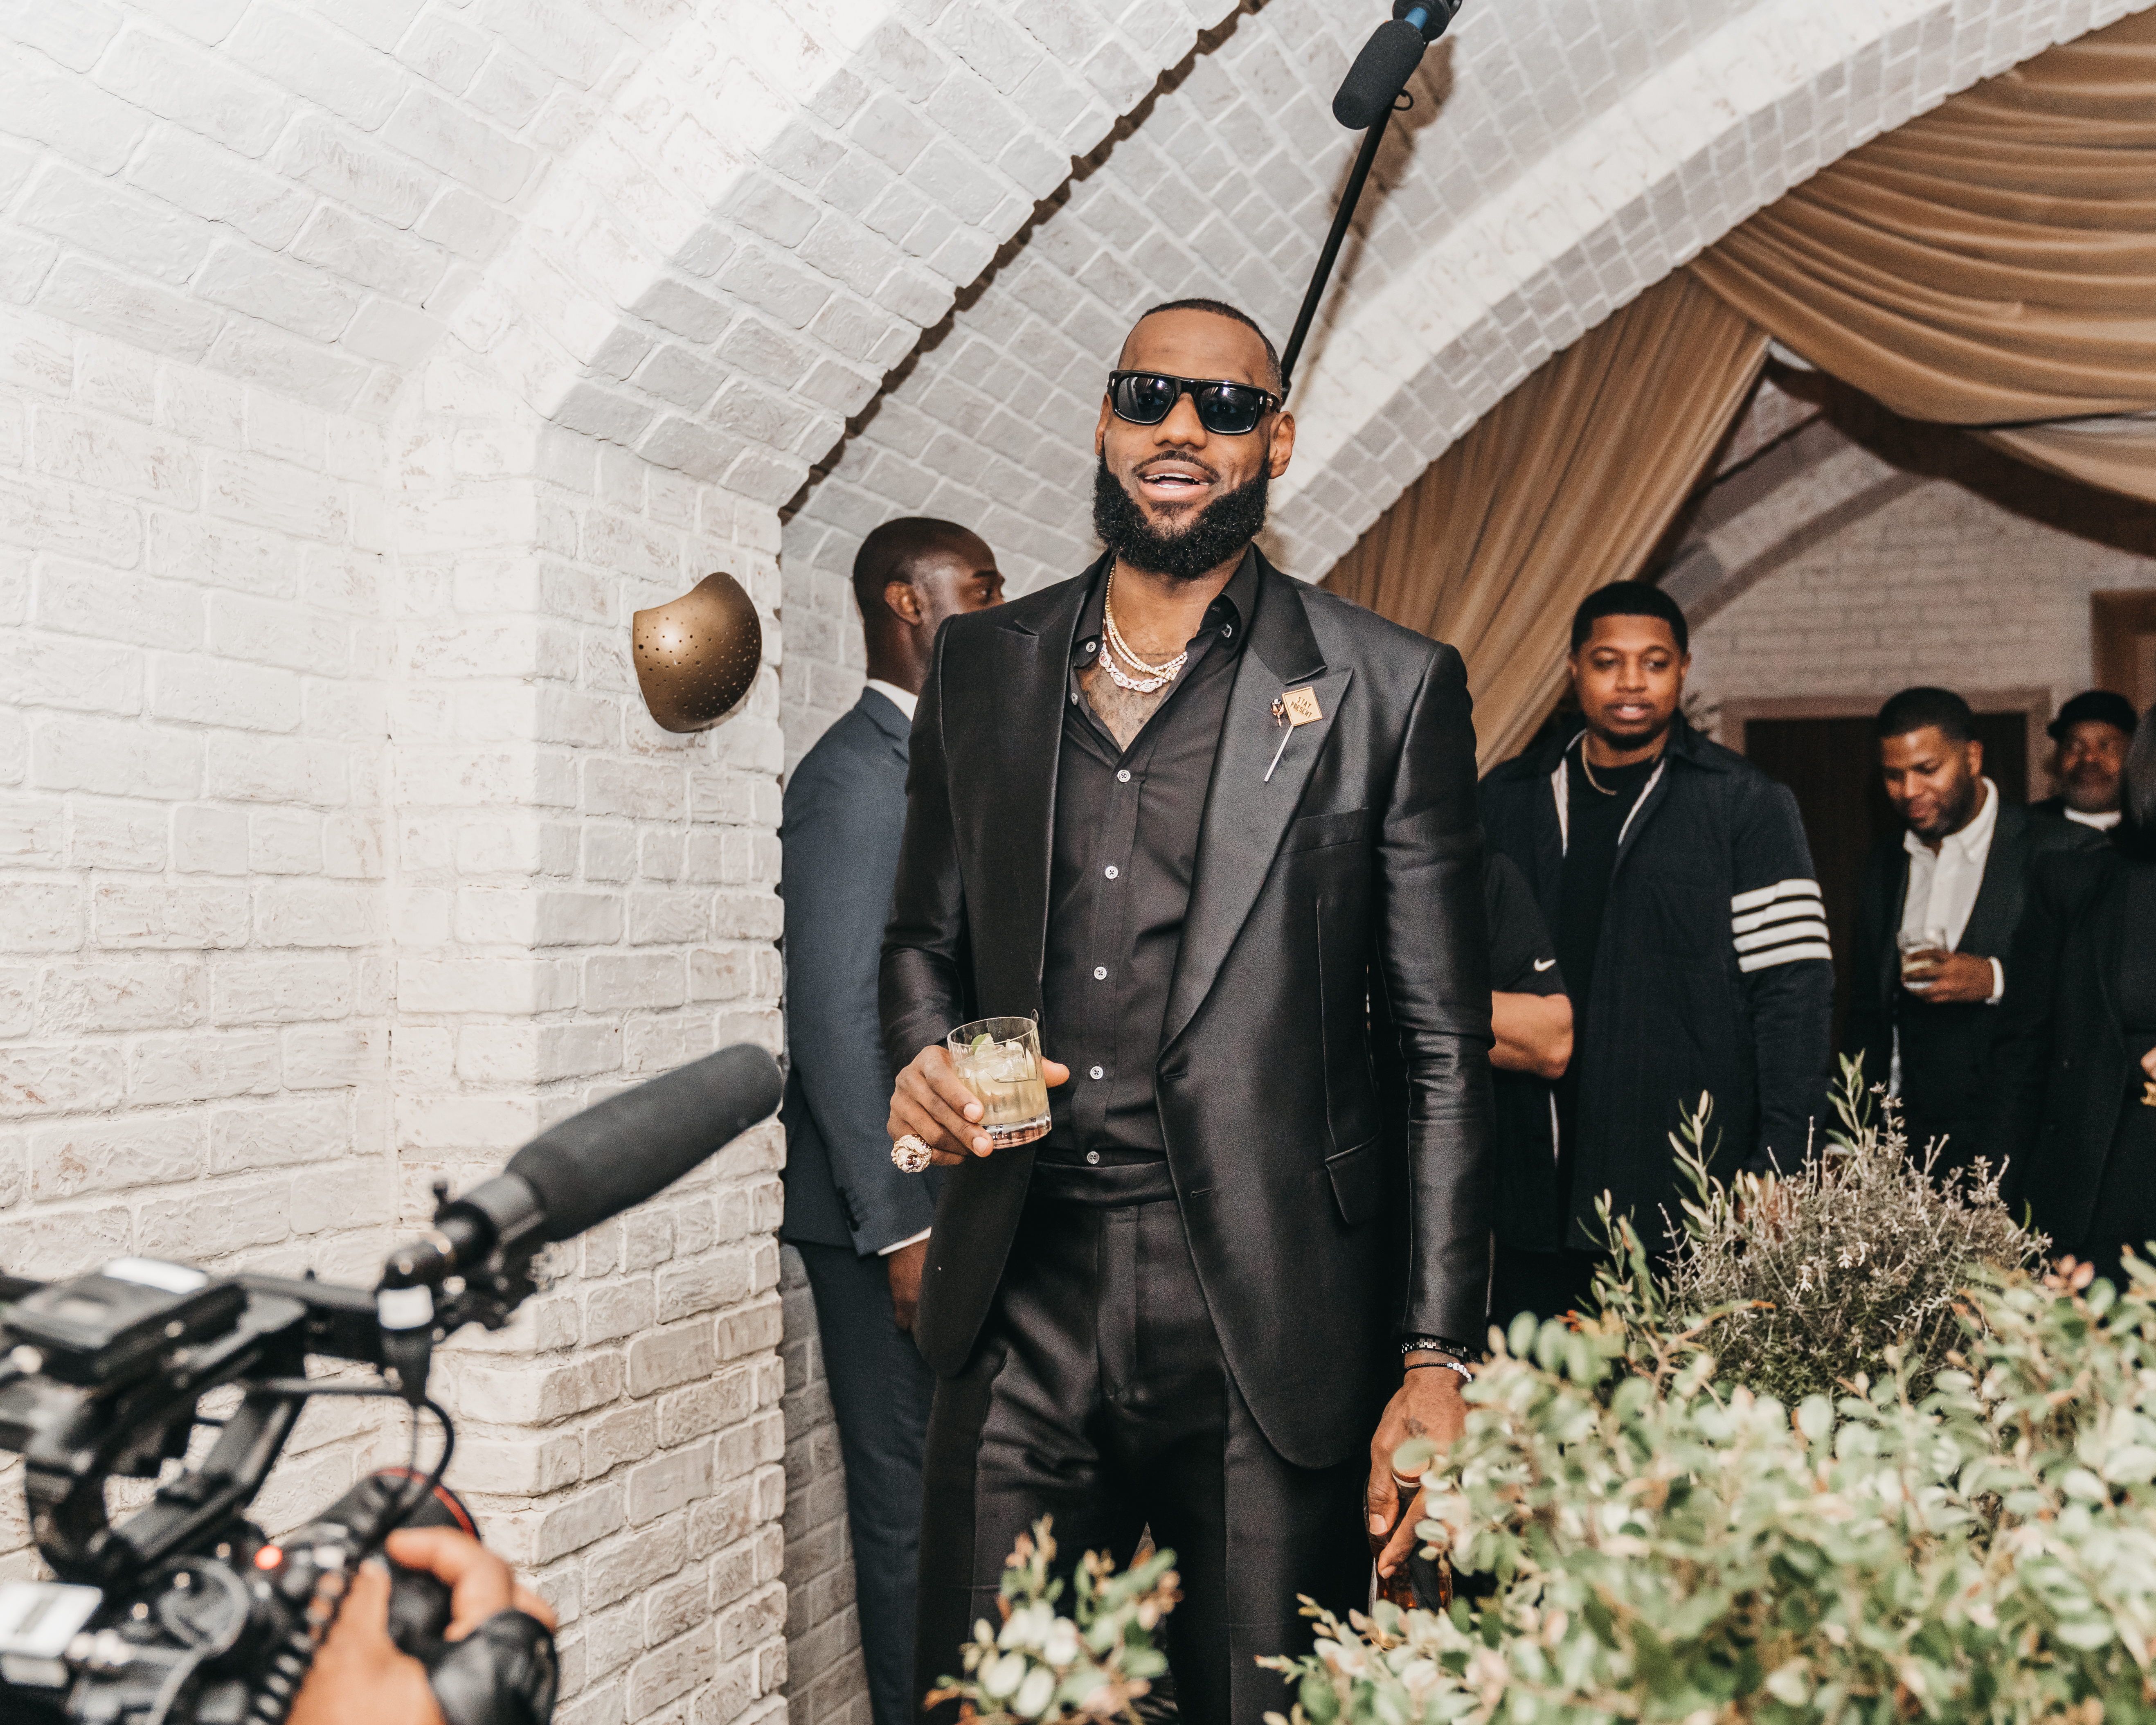 Behind the Scenes of LeBron Being Crowned the NBA's Scoring King